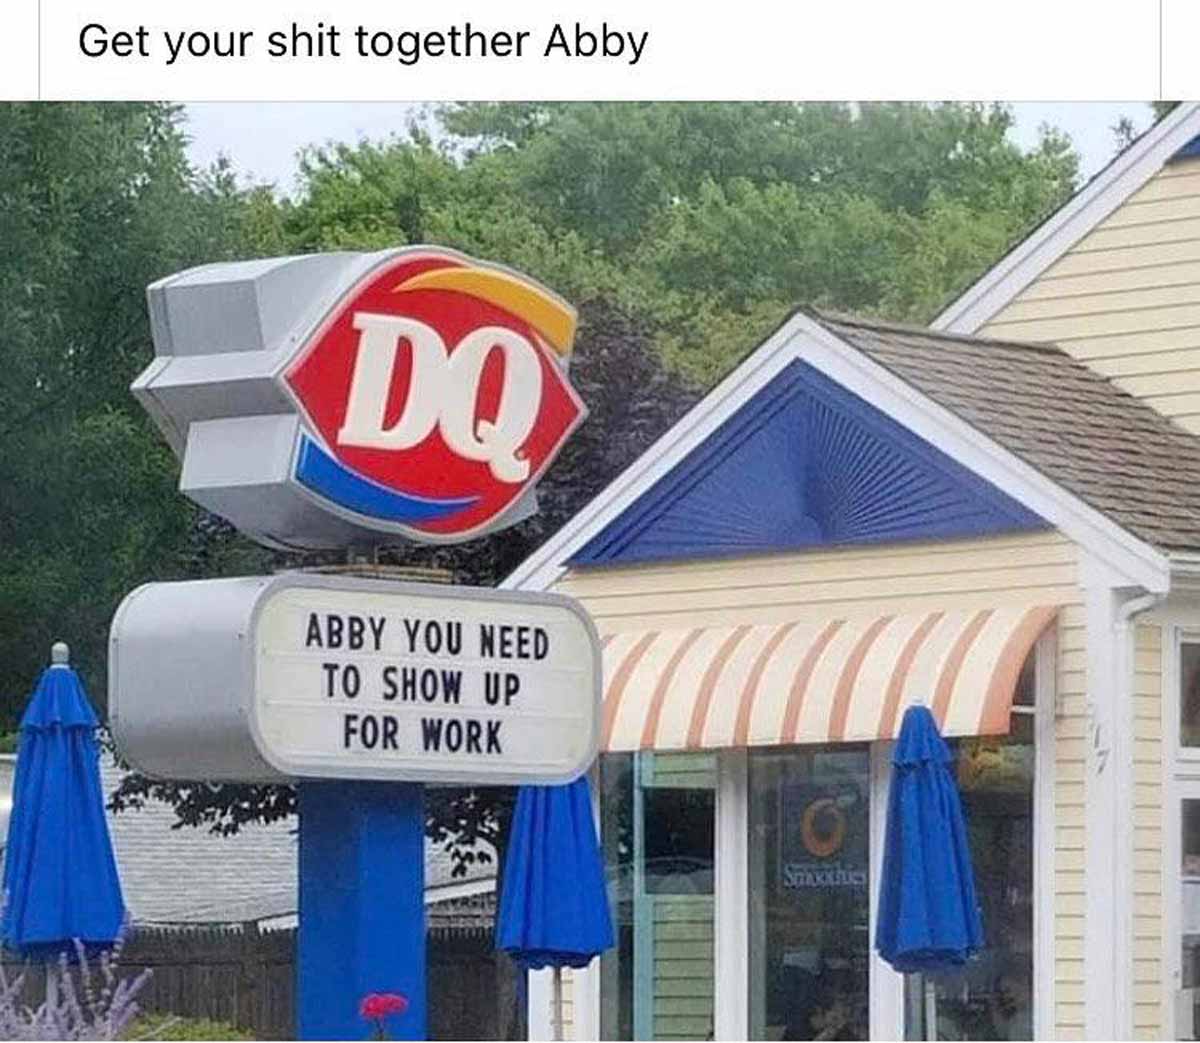 Funny Dairy Queen sign that says 'Abby you need to show up for work' with the caption 'get your shit together Abby'